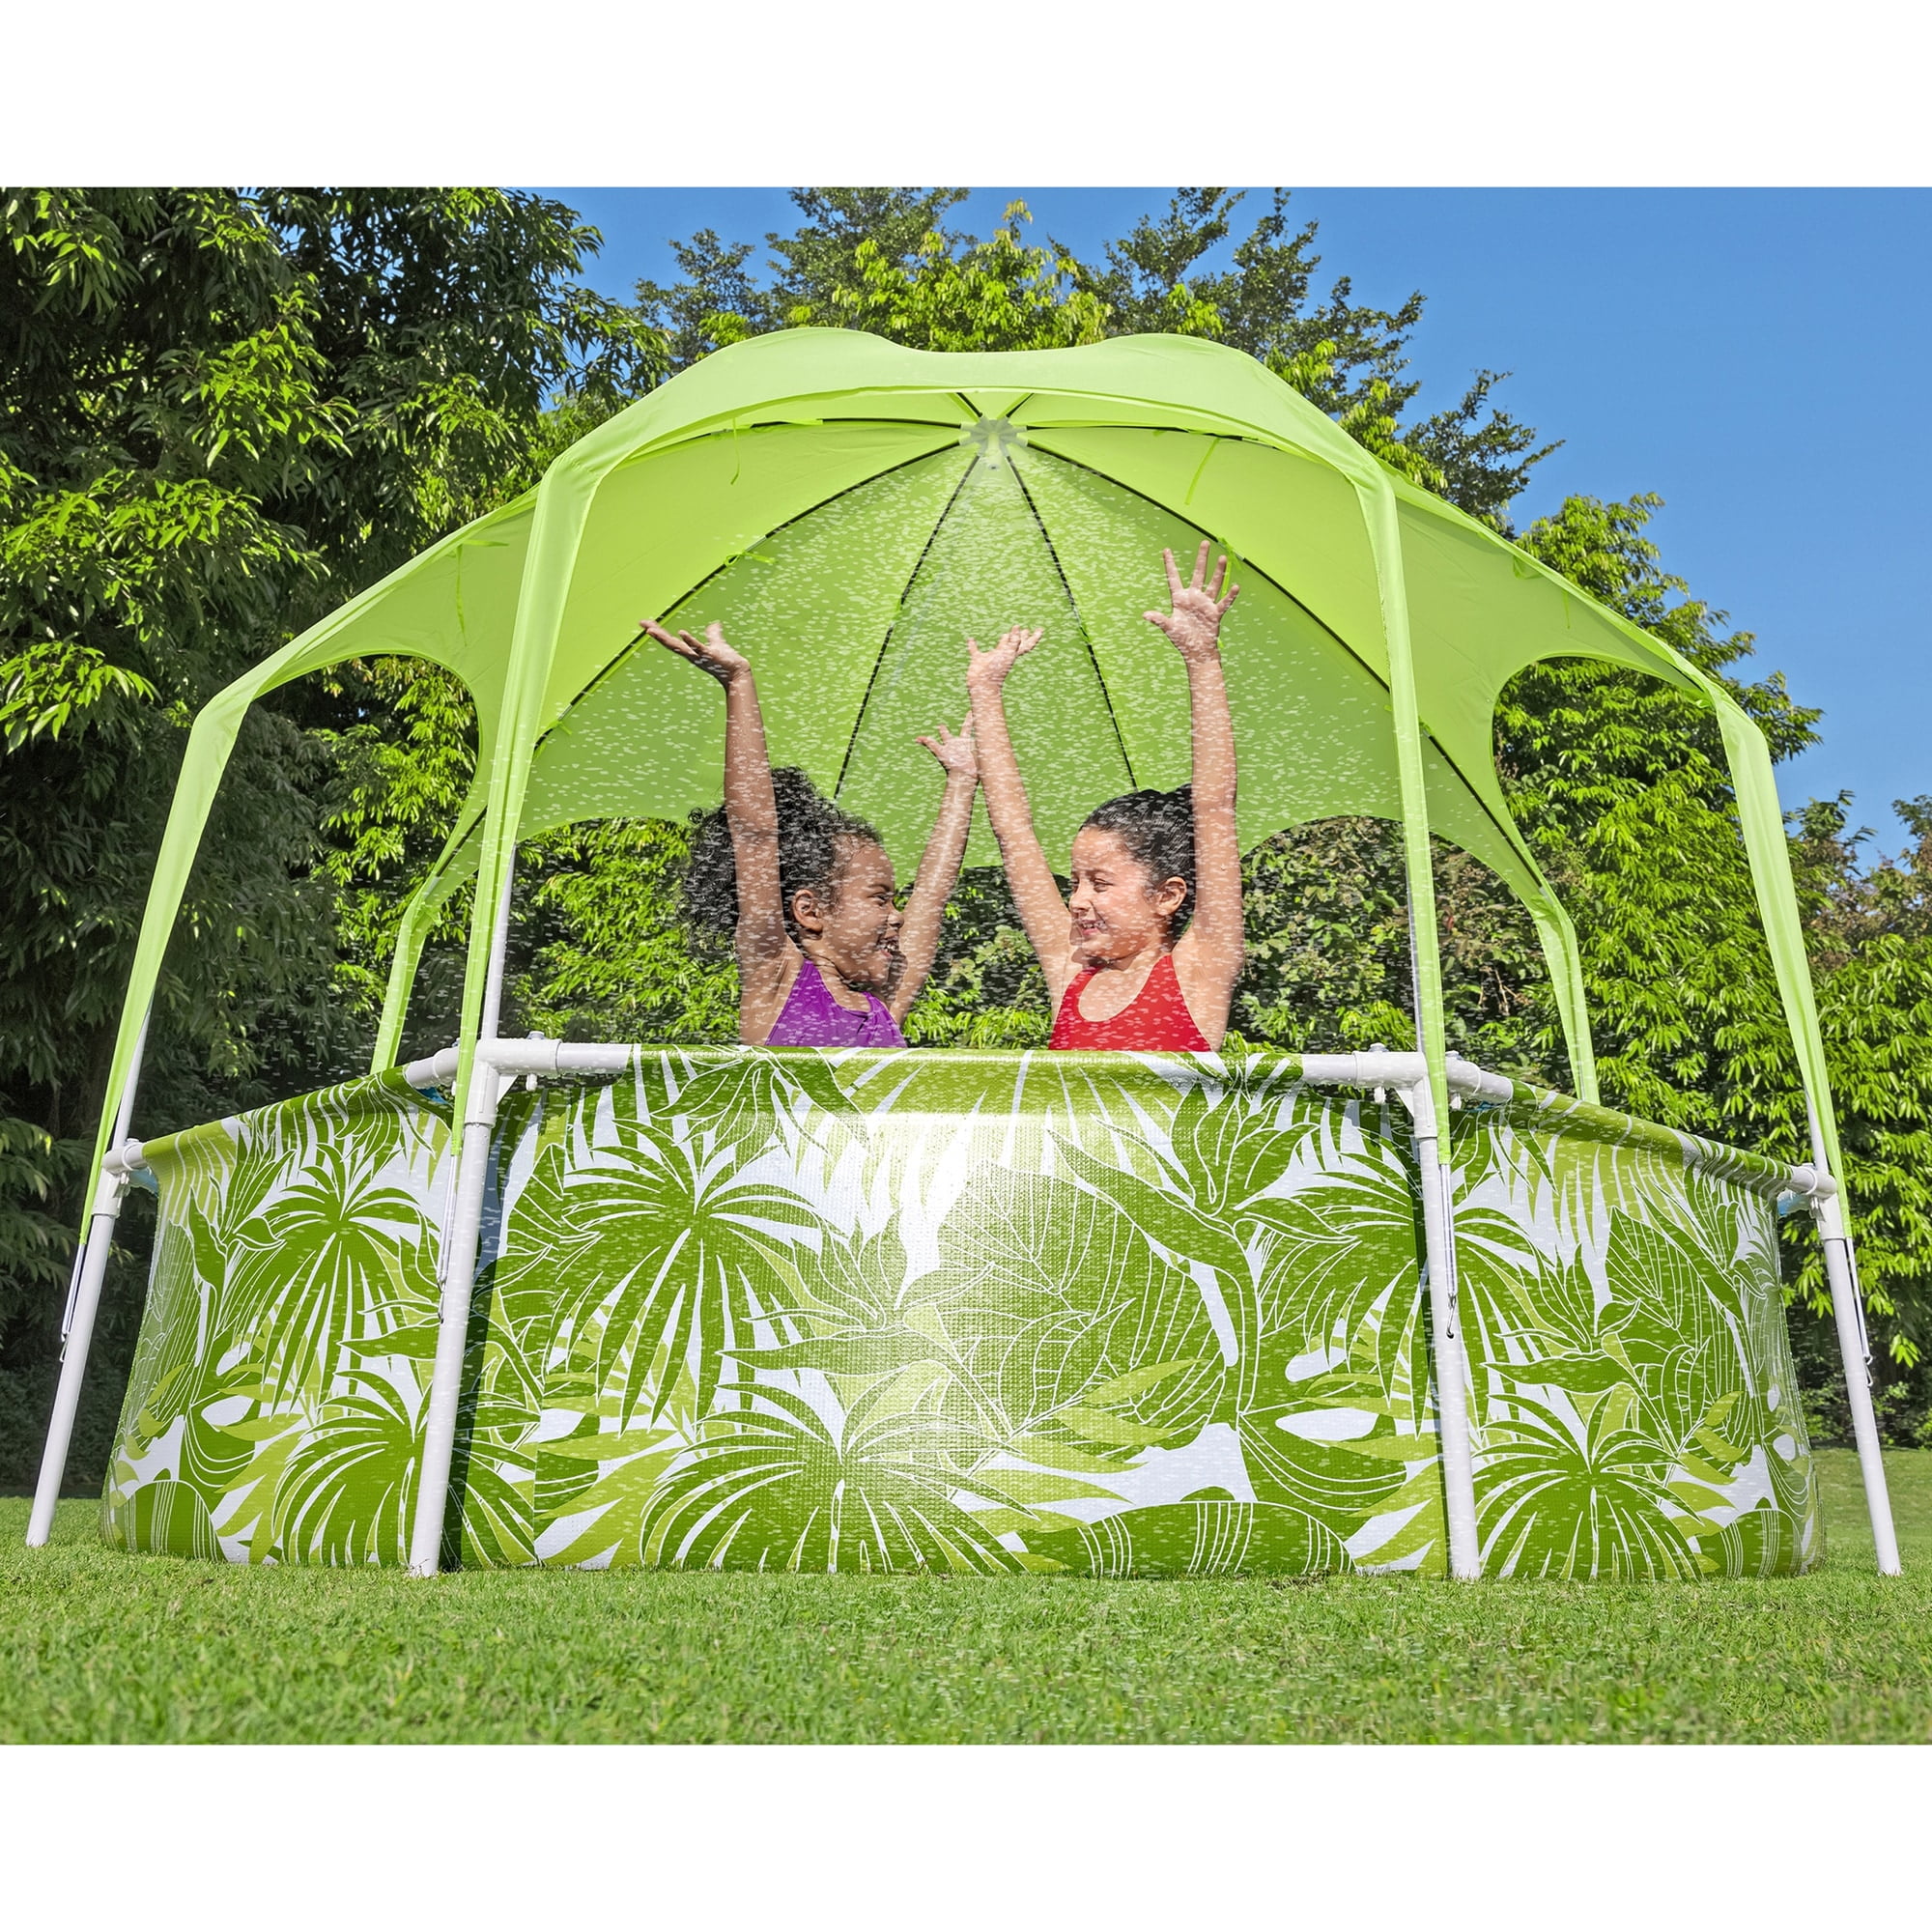 Shade Pool , Safe 446 - H2OGO!Splash-In-Shade With Pool UV Play Kids x 8\' 20\